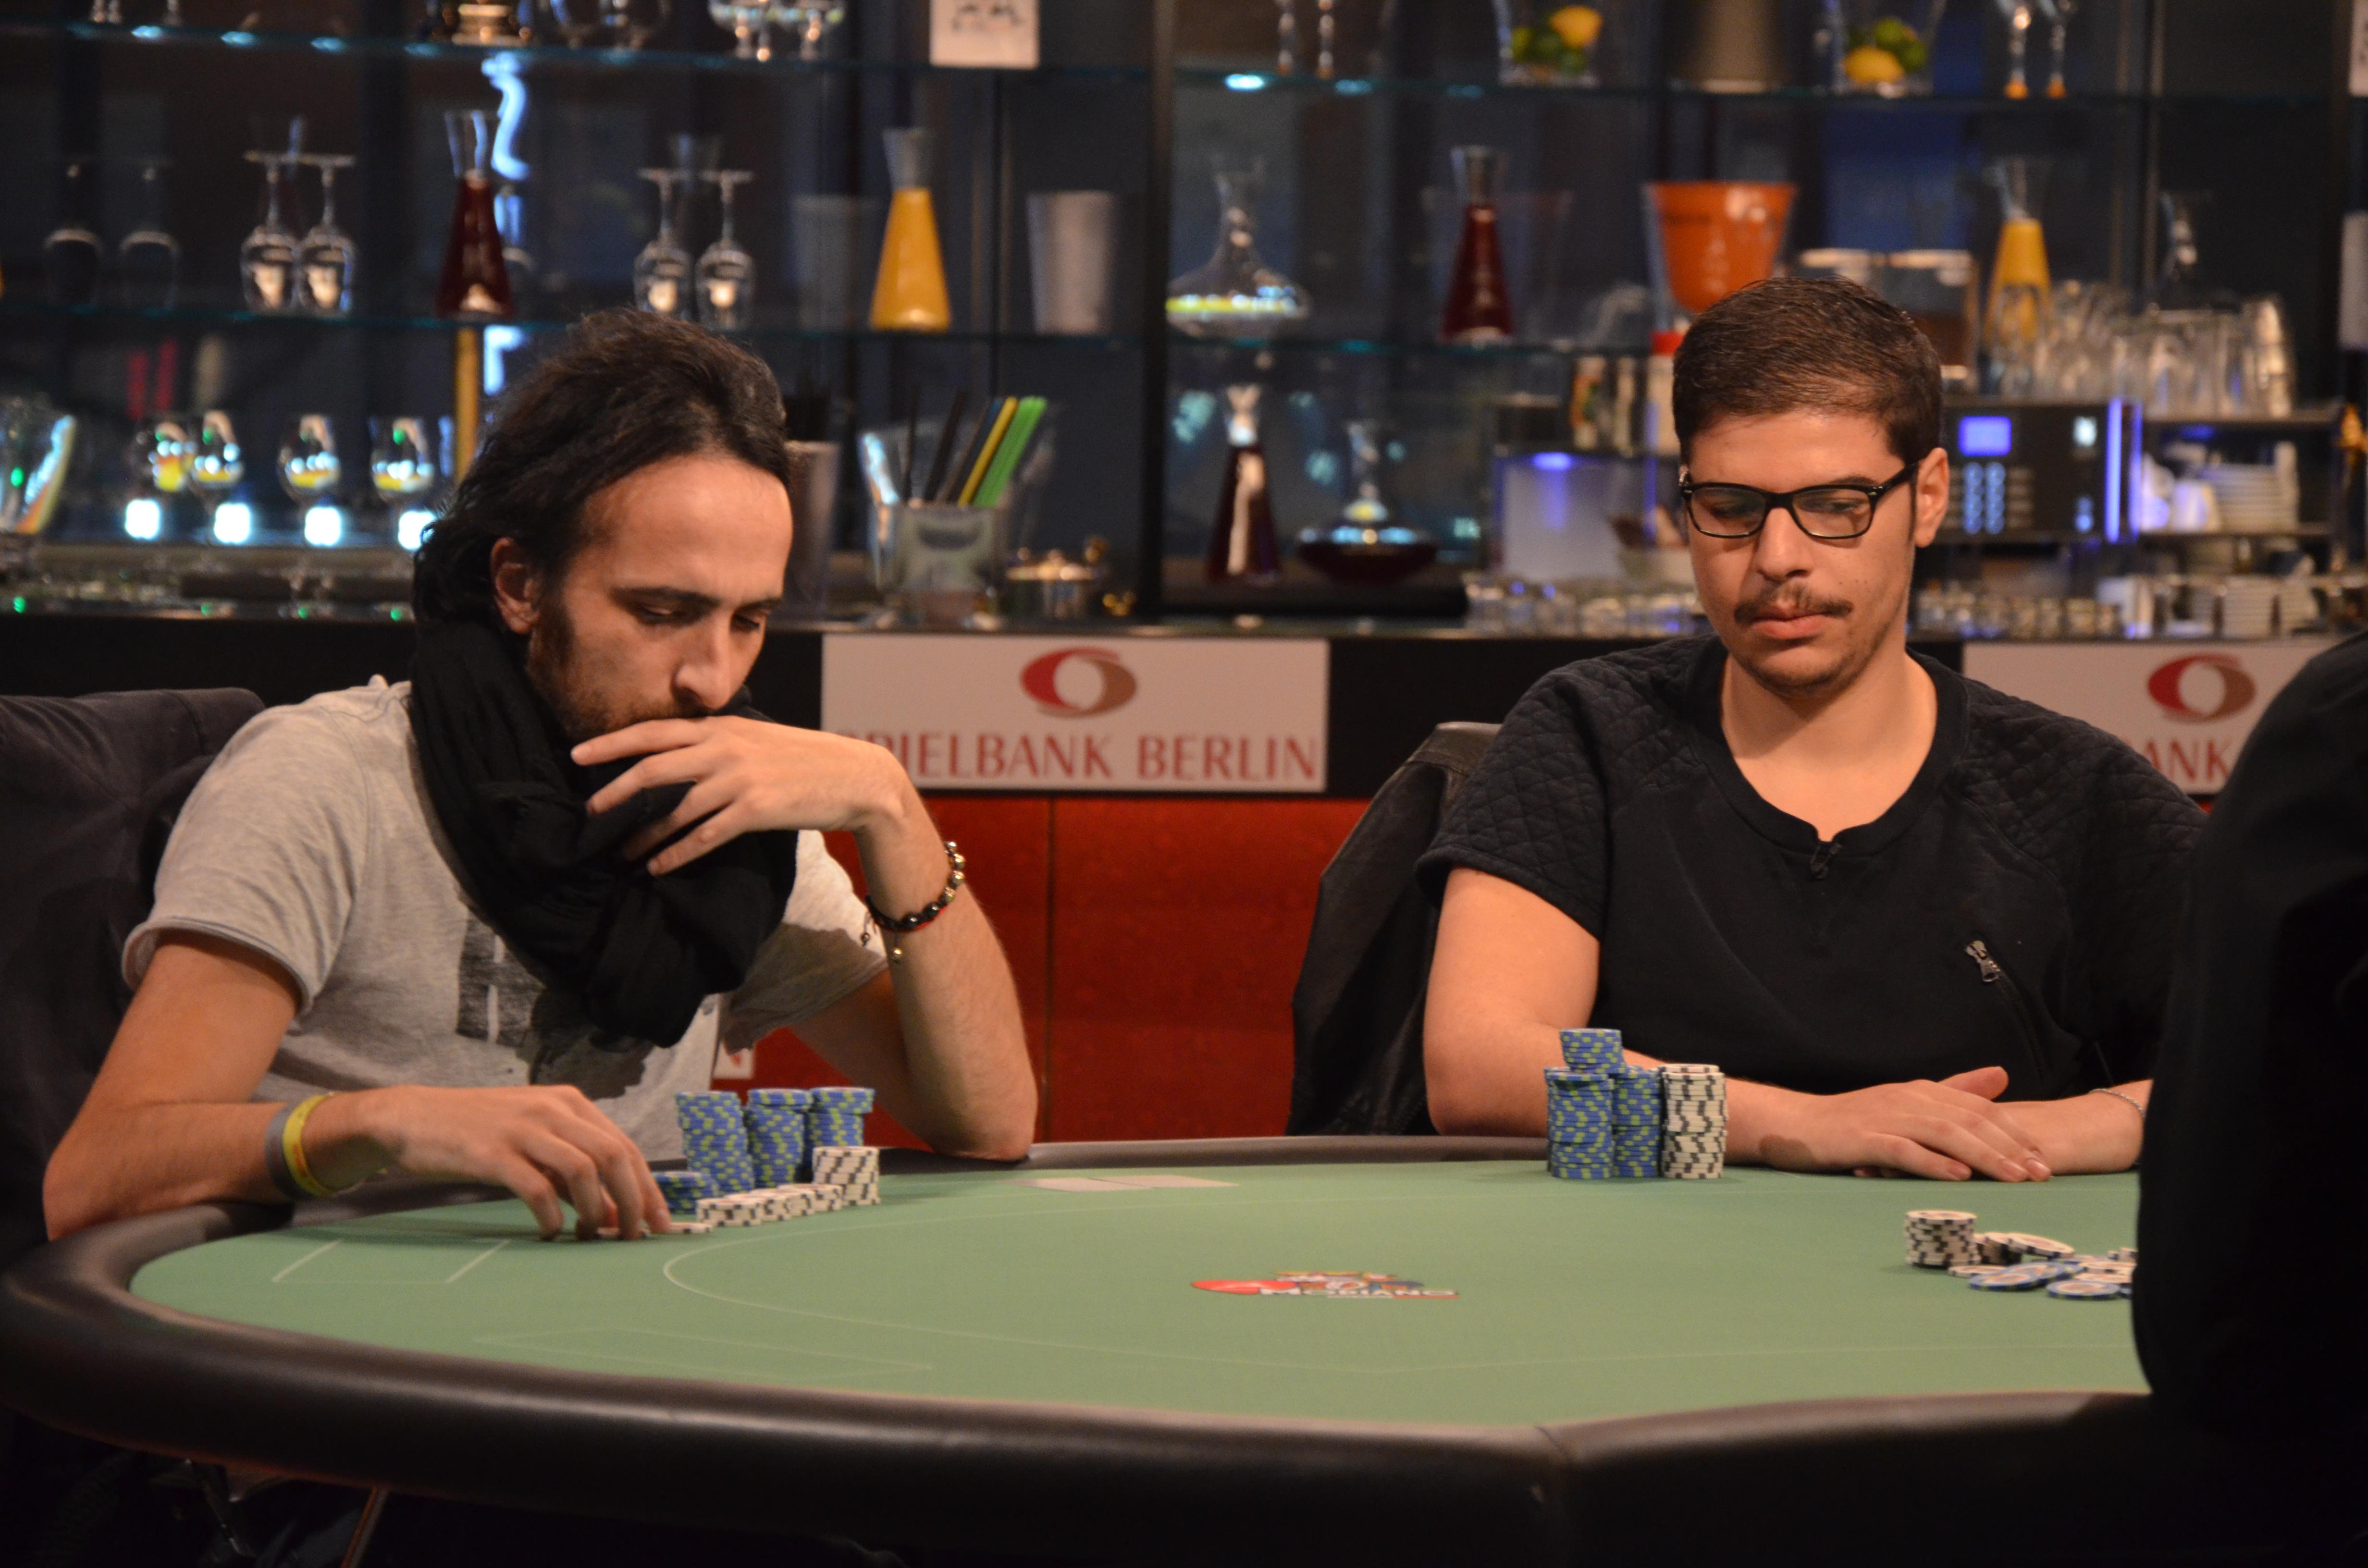 Mustapha Kanit: “Come affrontare le series di poker online”